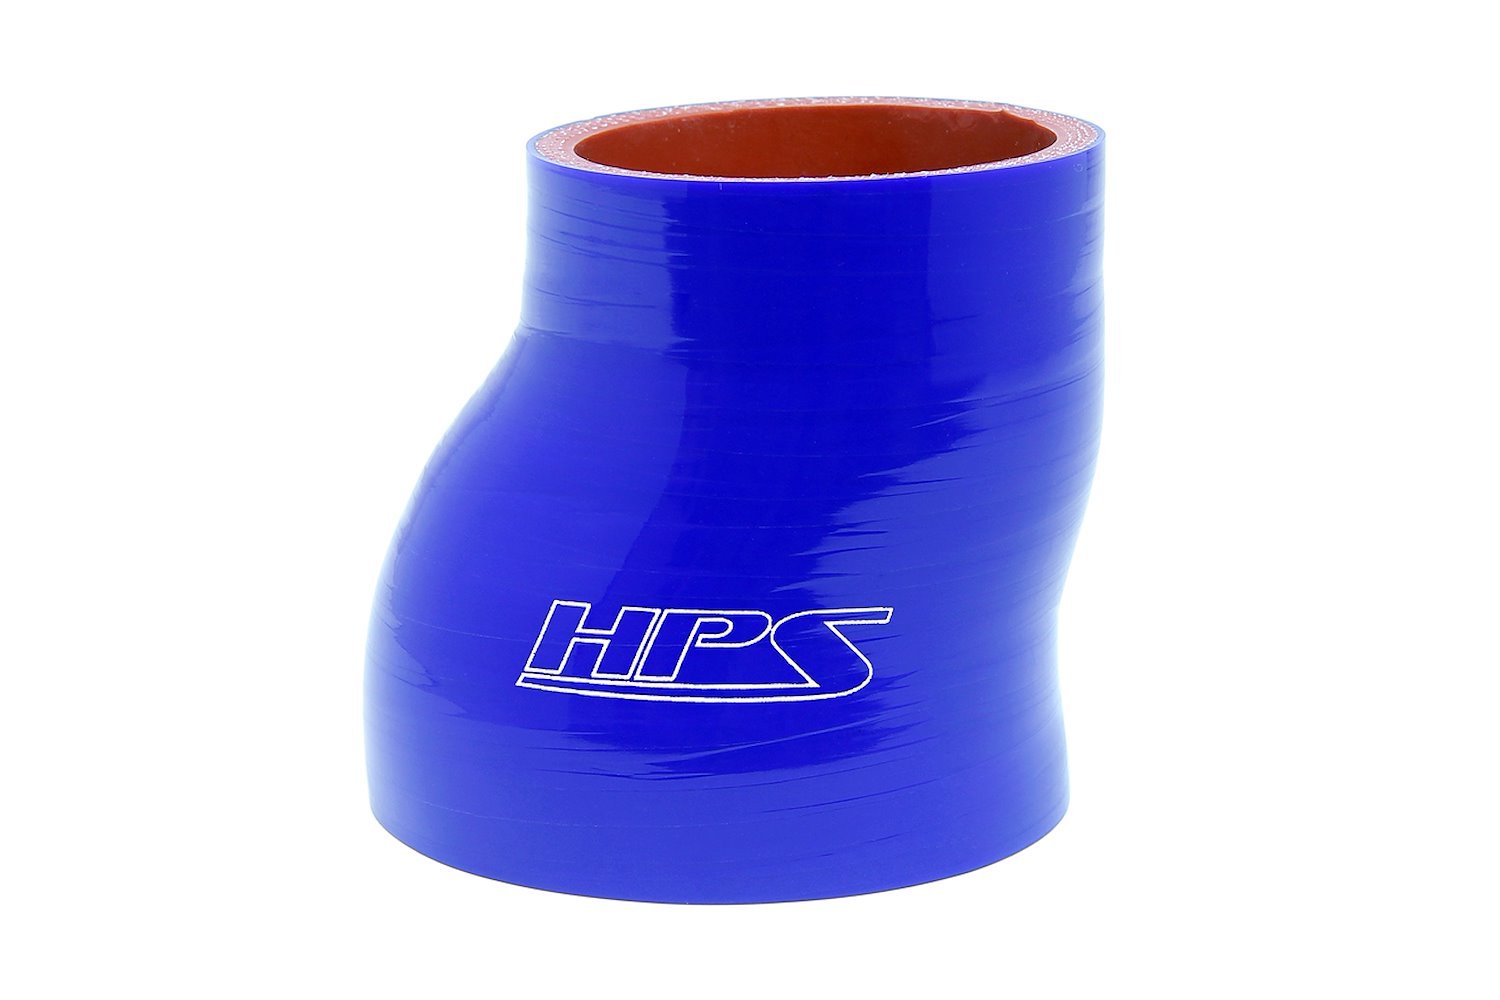 HTSOR-275-300-BLUE Silicone Offset Reducer Hose, High-Temp Reinforced, 2-3/4 in. - 3 in. ID, 3 in. Long, Blue